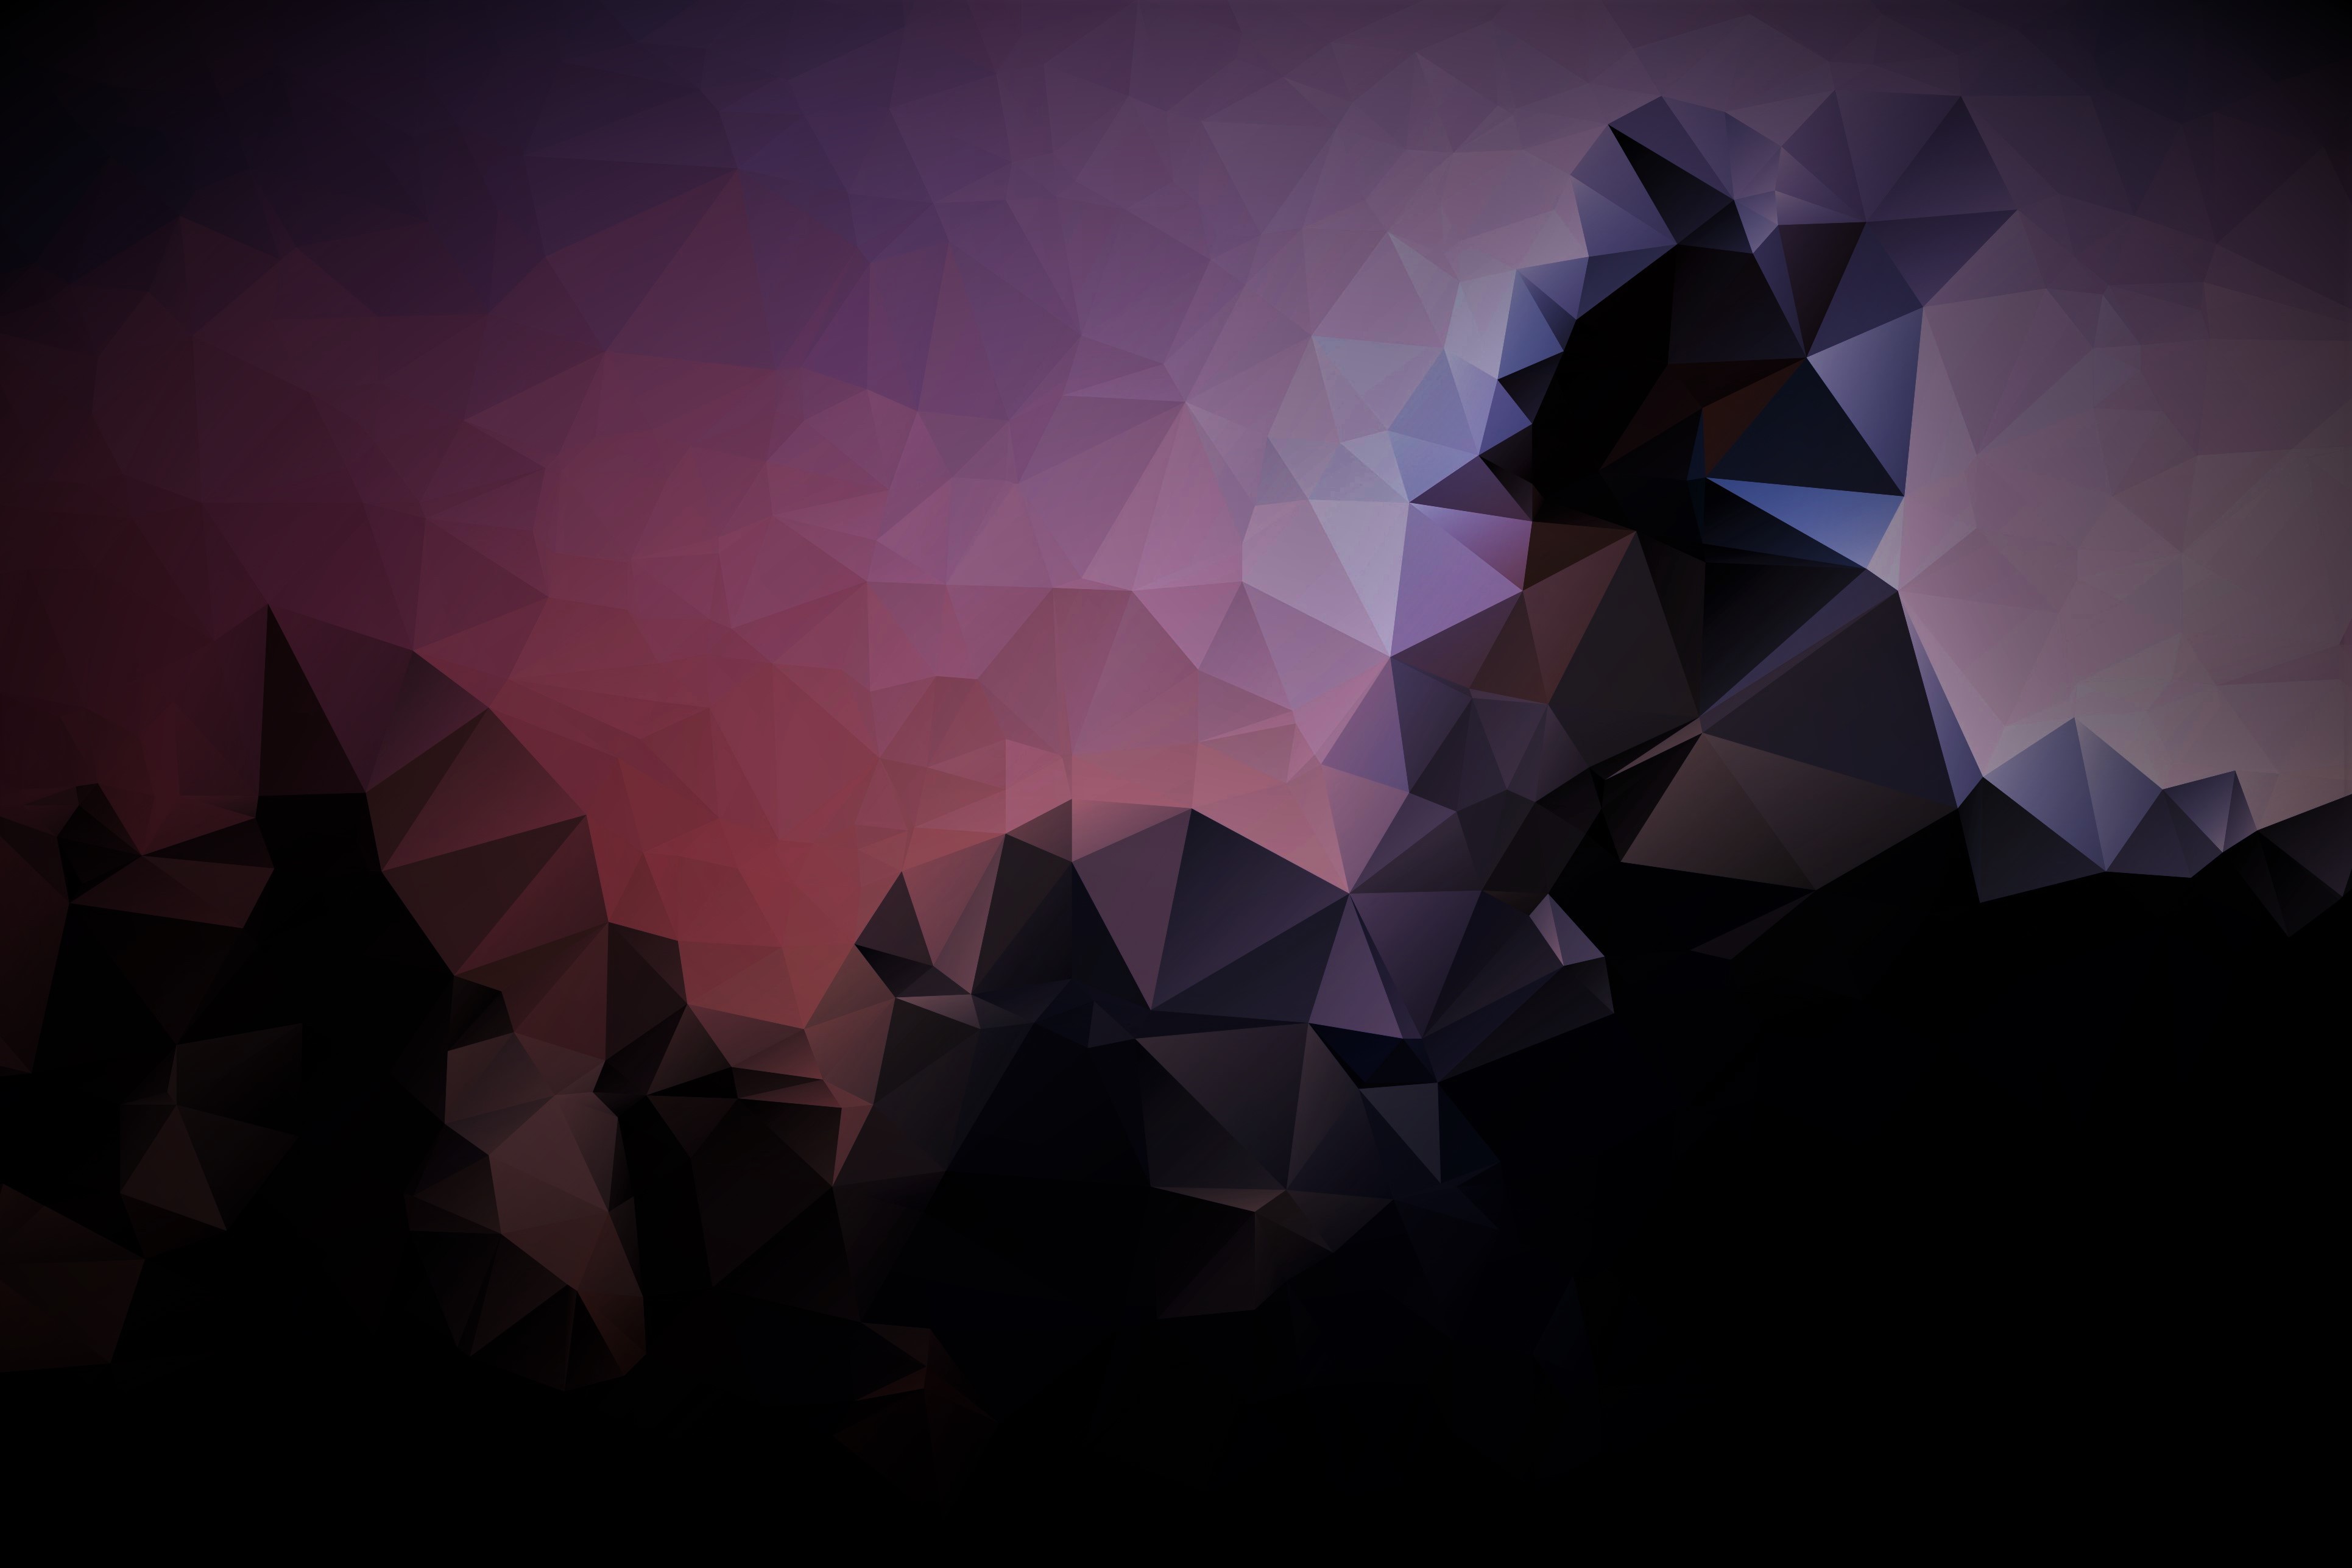 Abstract Artistic Wallpapers